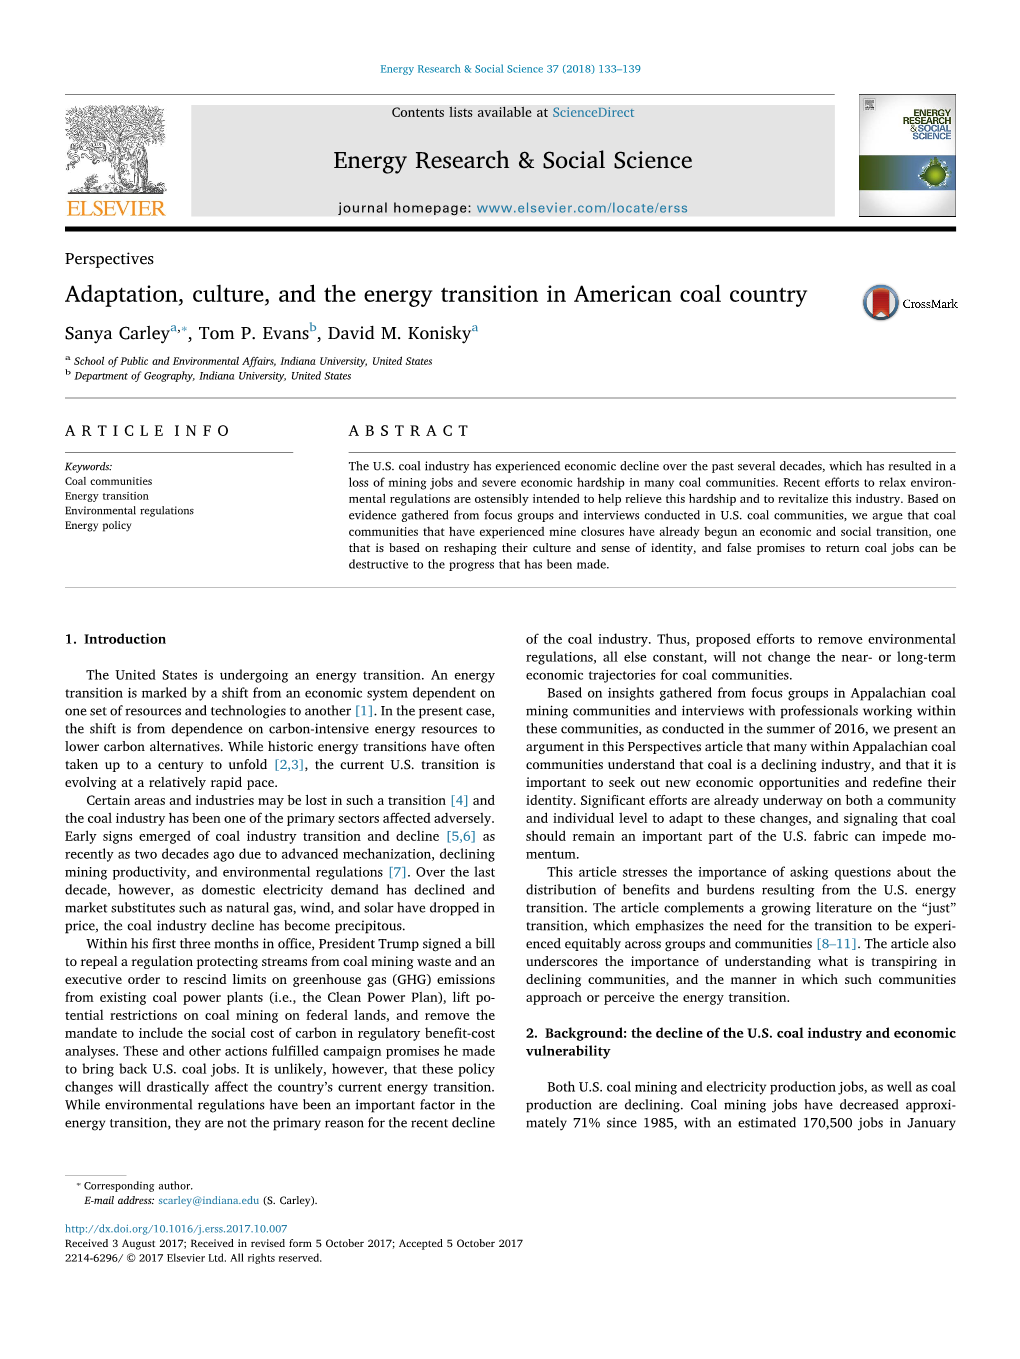 Adaptation, Culture, and the Energy Transition in American Coal Country MARK ⁎ Sanya Carleya, , Tom P